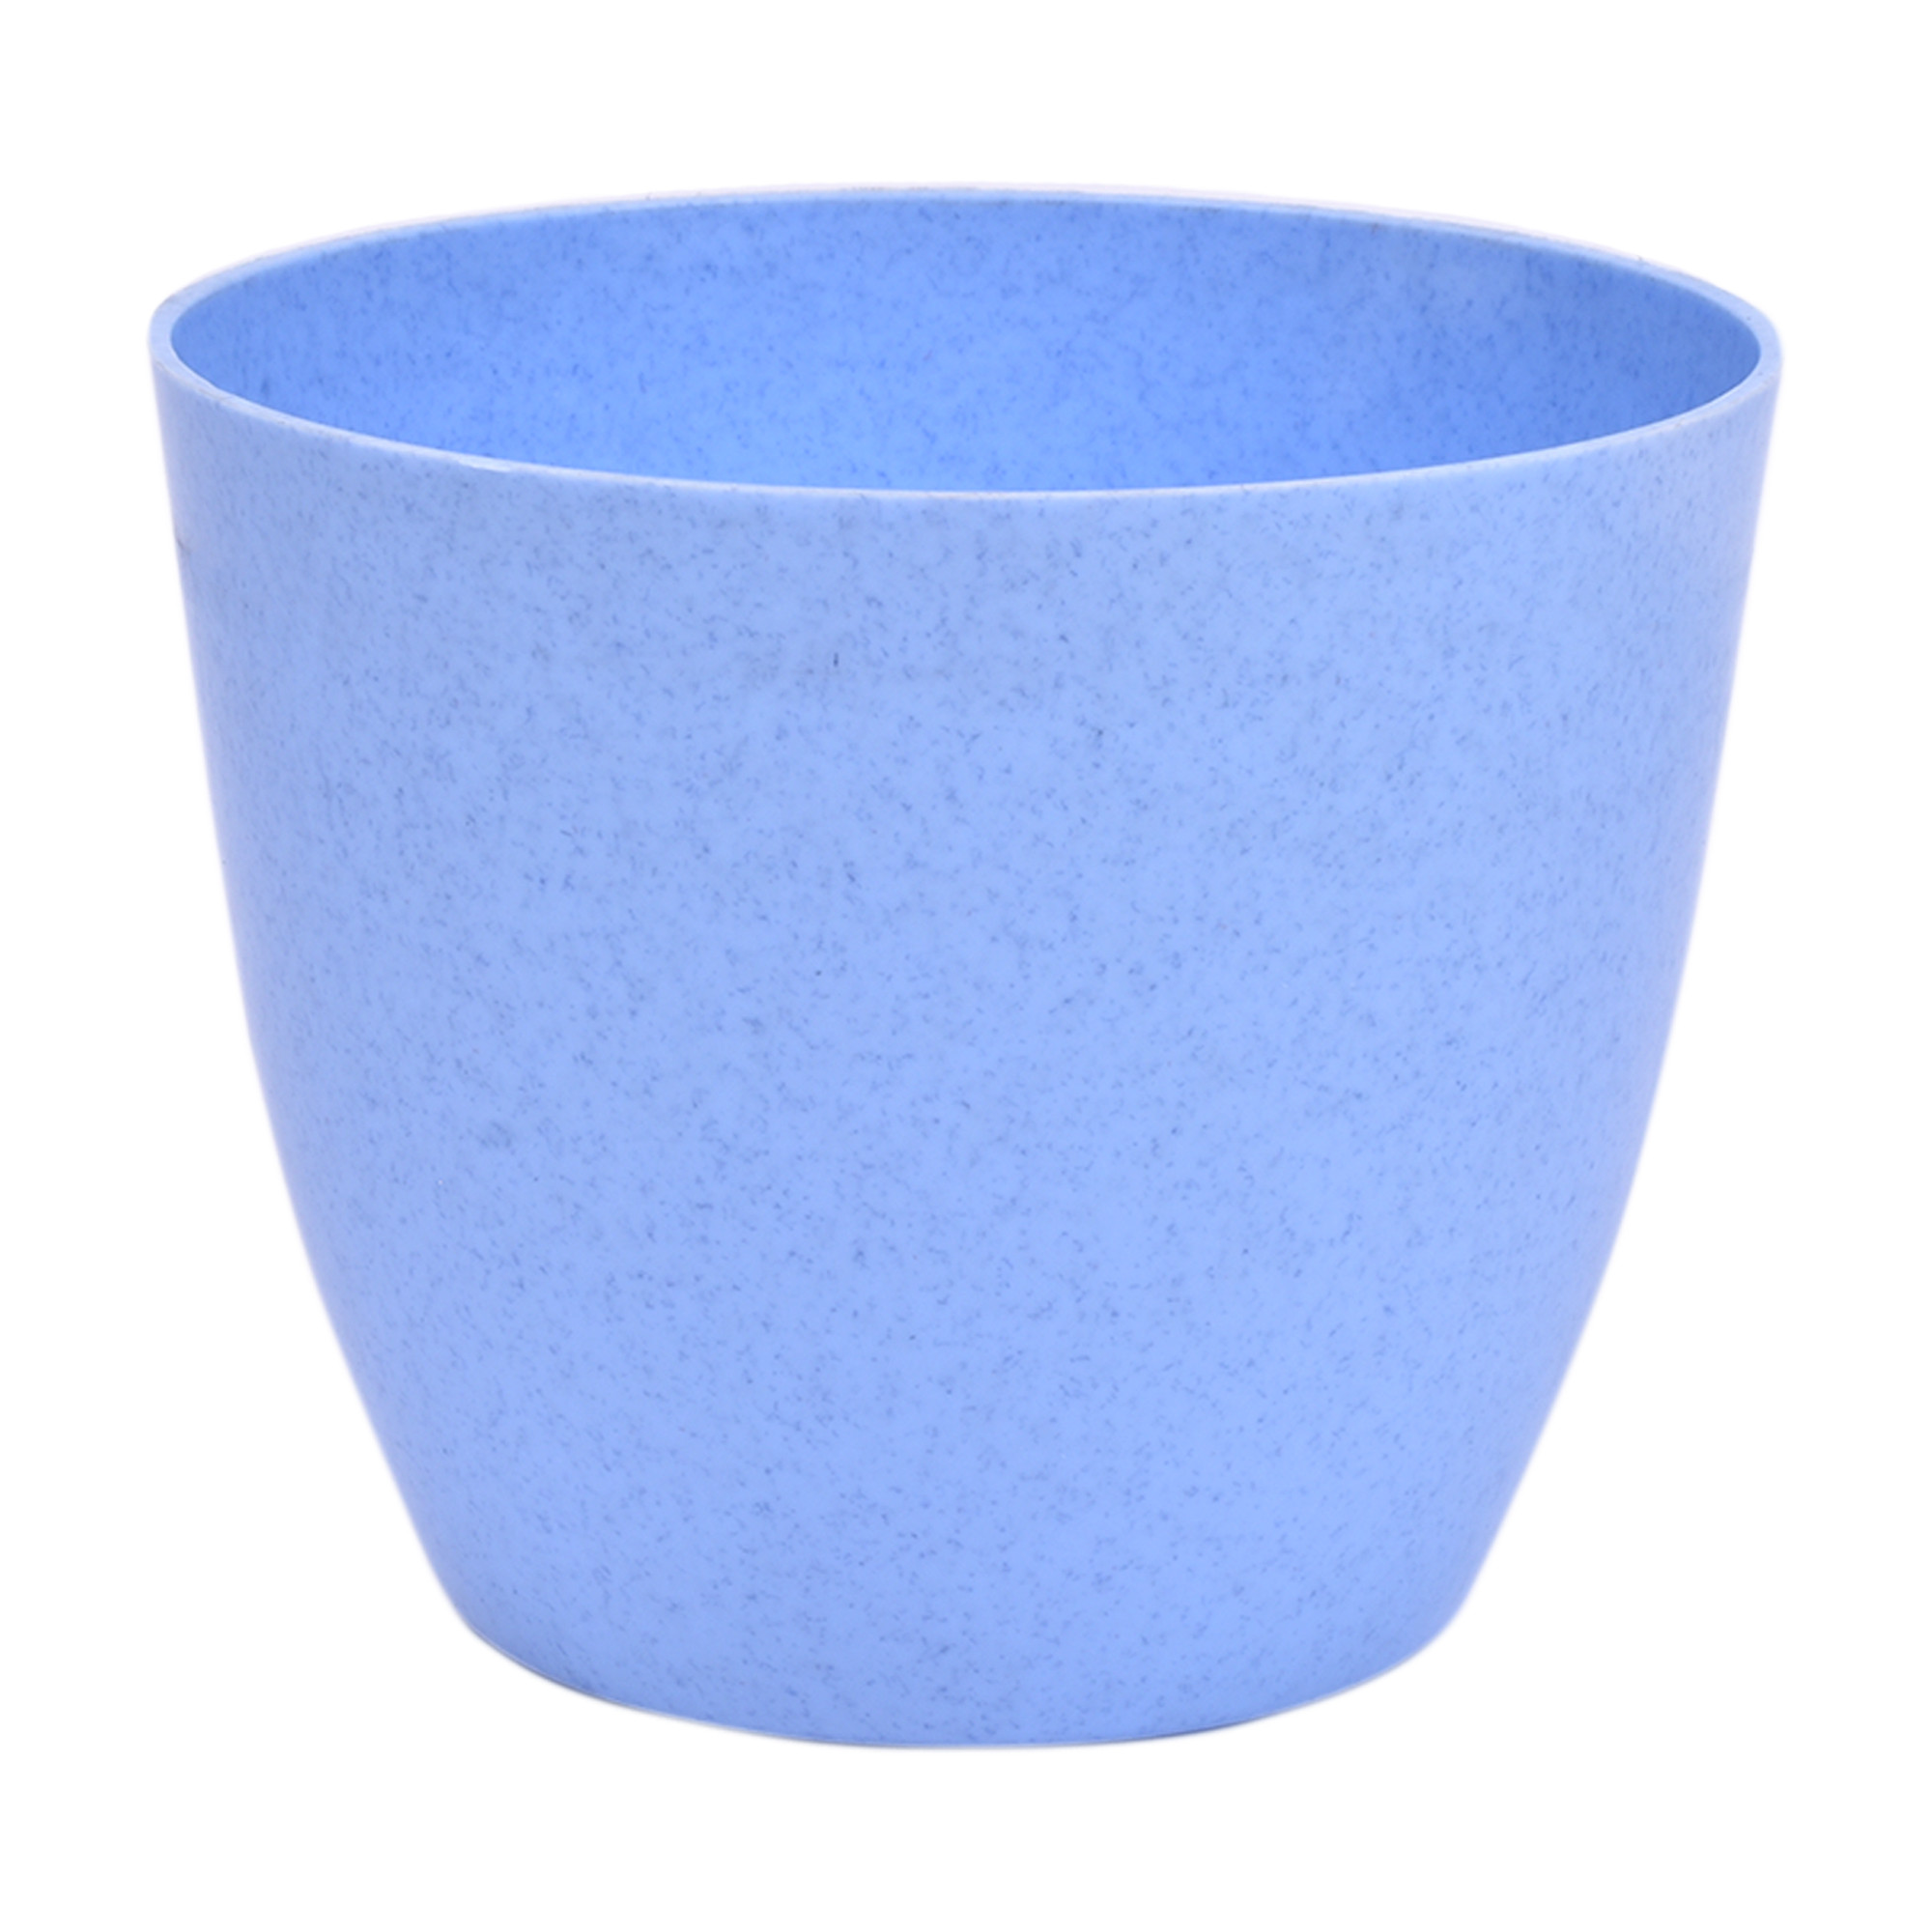 Kuber Industries Flower Pot | Flower Pot for Living Room-Office | Flower Planters for Home-office-Lawns & Garden Décor | Flower Pots for Balcony | Marble Cool | 5 Inch | Blue & Mint Green